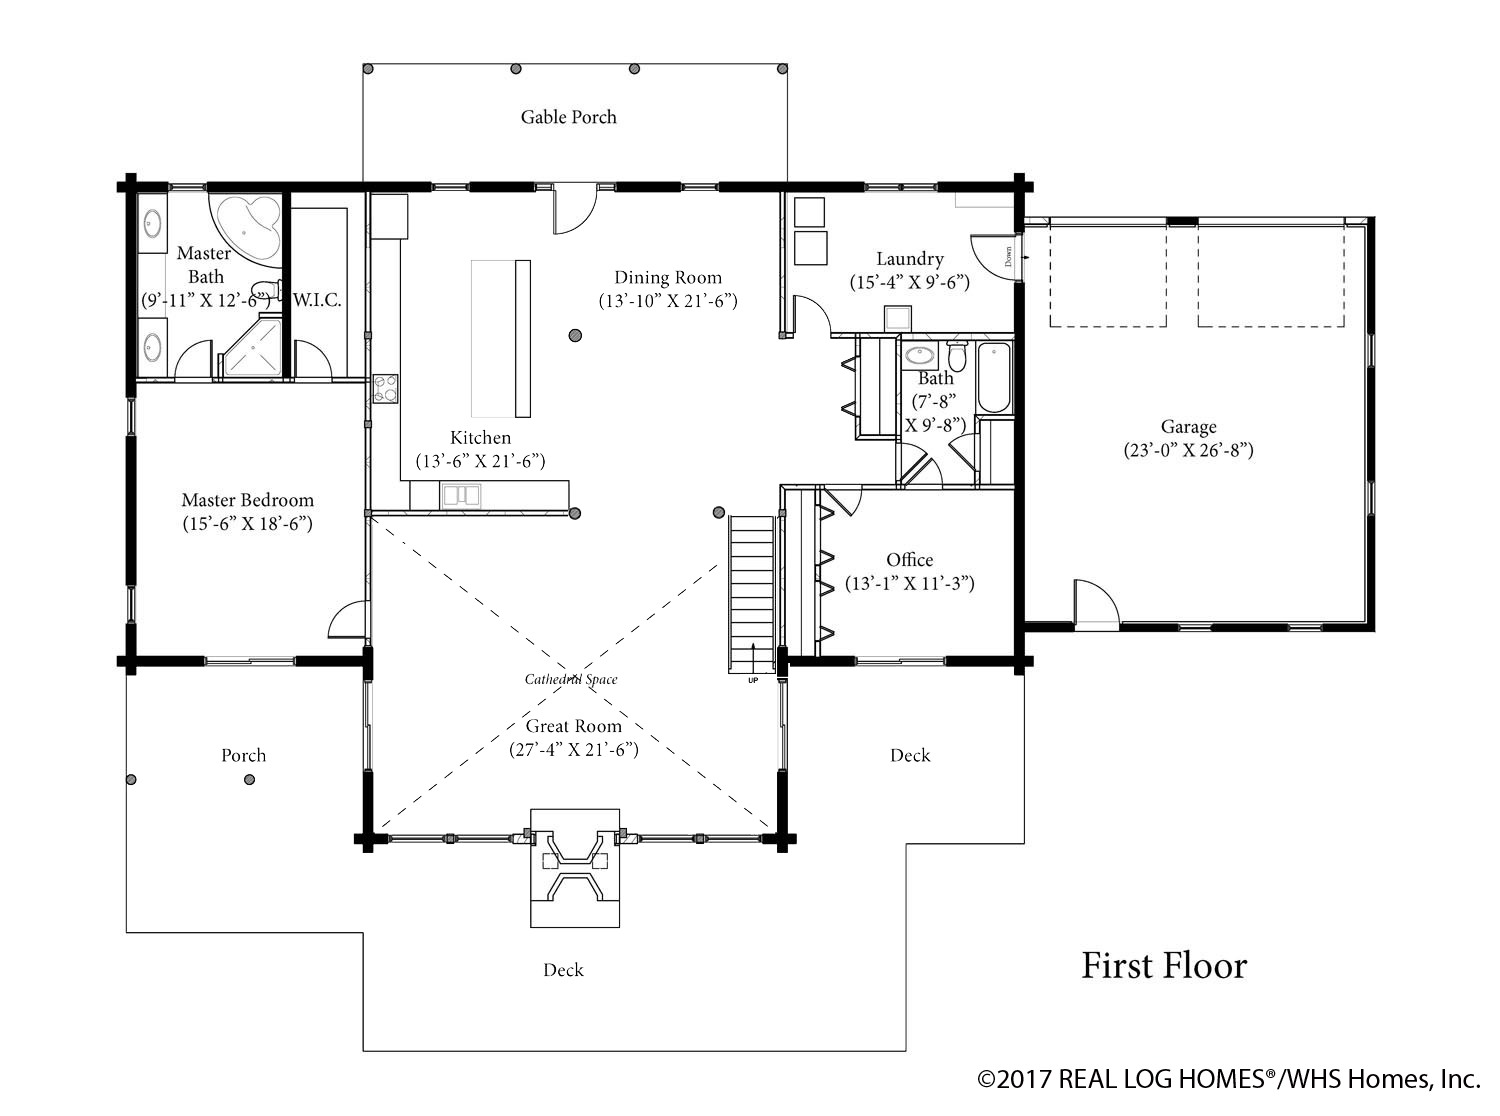 Green Gables Log Home Plan from Real Log Homes